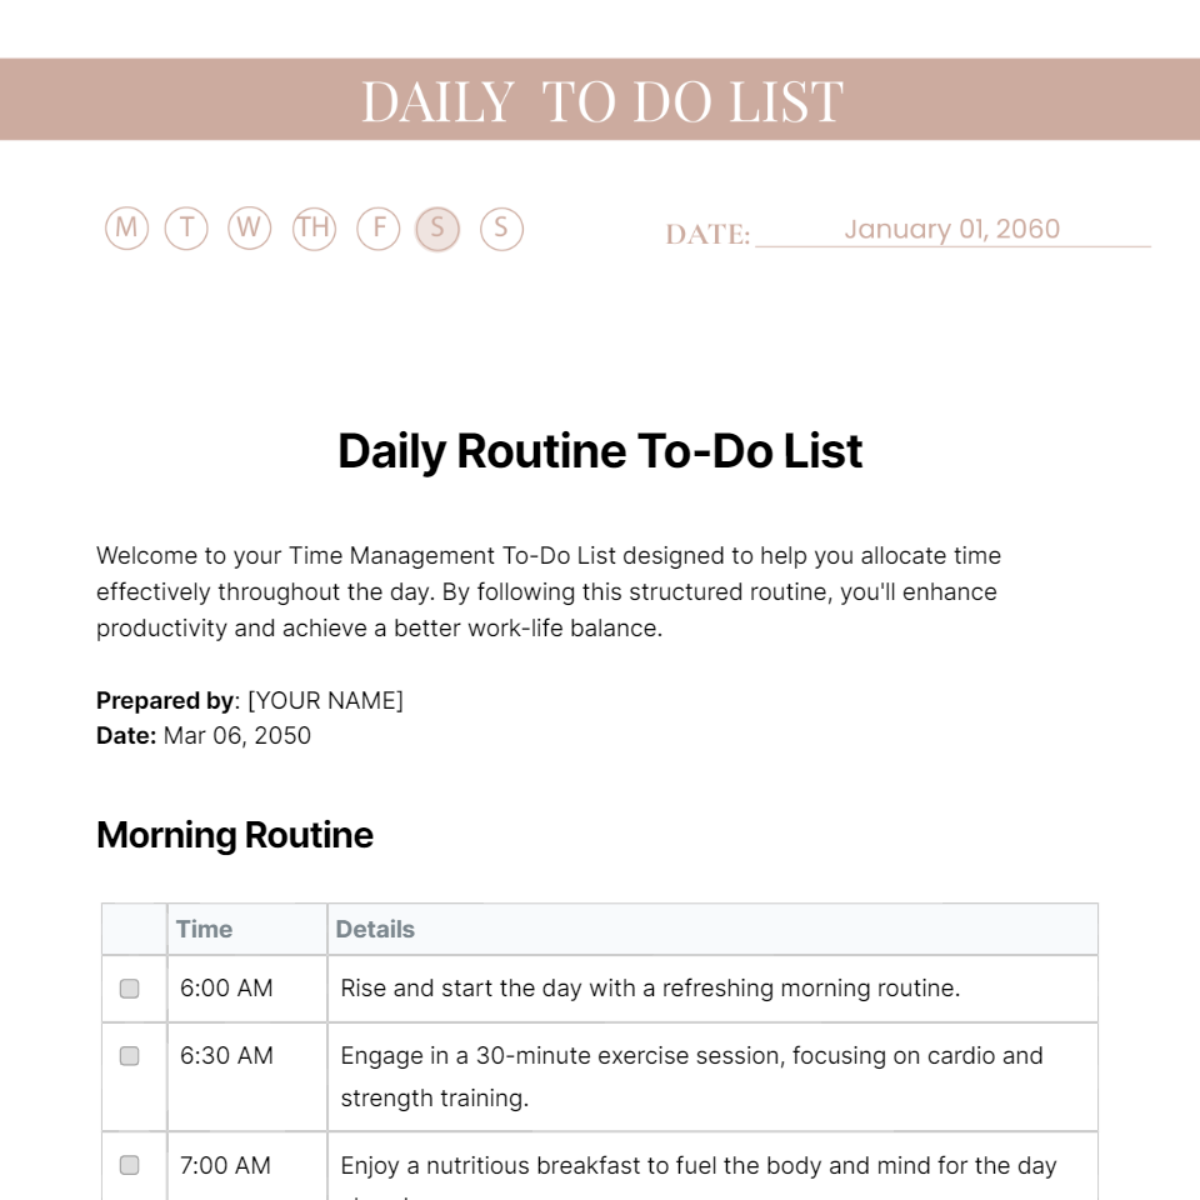 Daily Routine To Do List Template